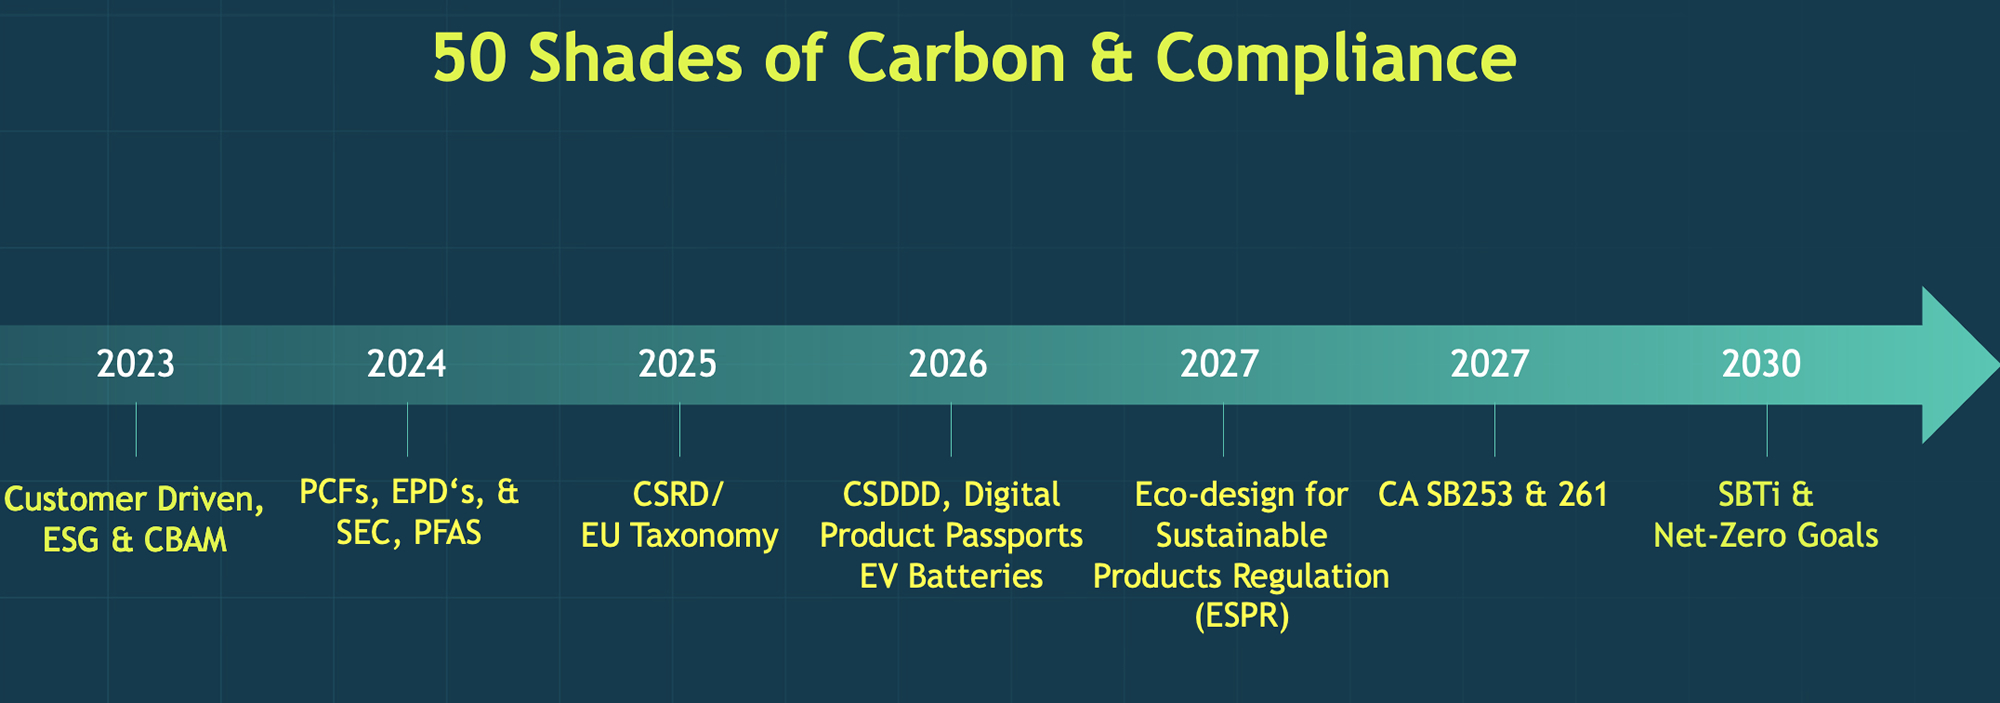 50 shades of carbon and compliance